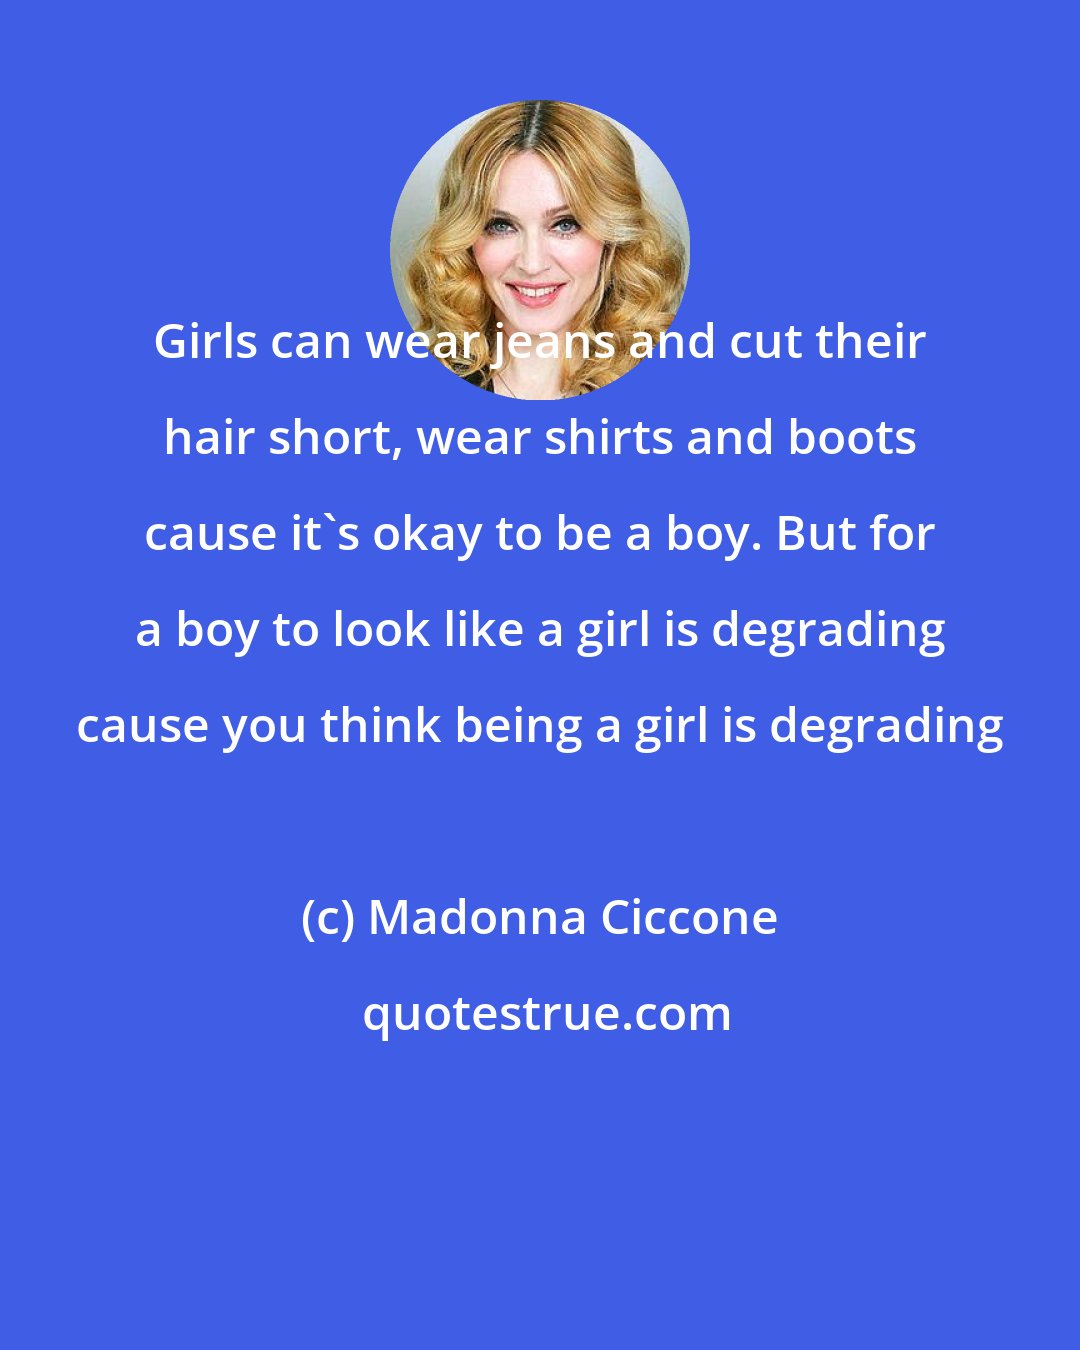 Madonna Ciccone: Girls can wear jeans and cut their hair short, wear shirts and boots cause it's okay to be a boy. But for a boy to look like a girl is degrading cause you think being a girl is degrading